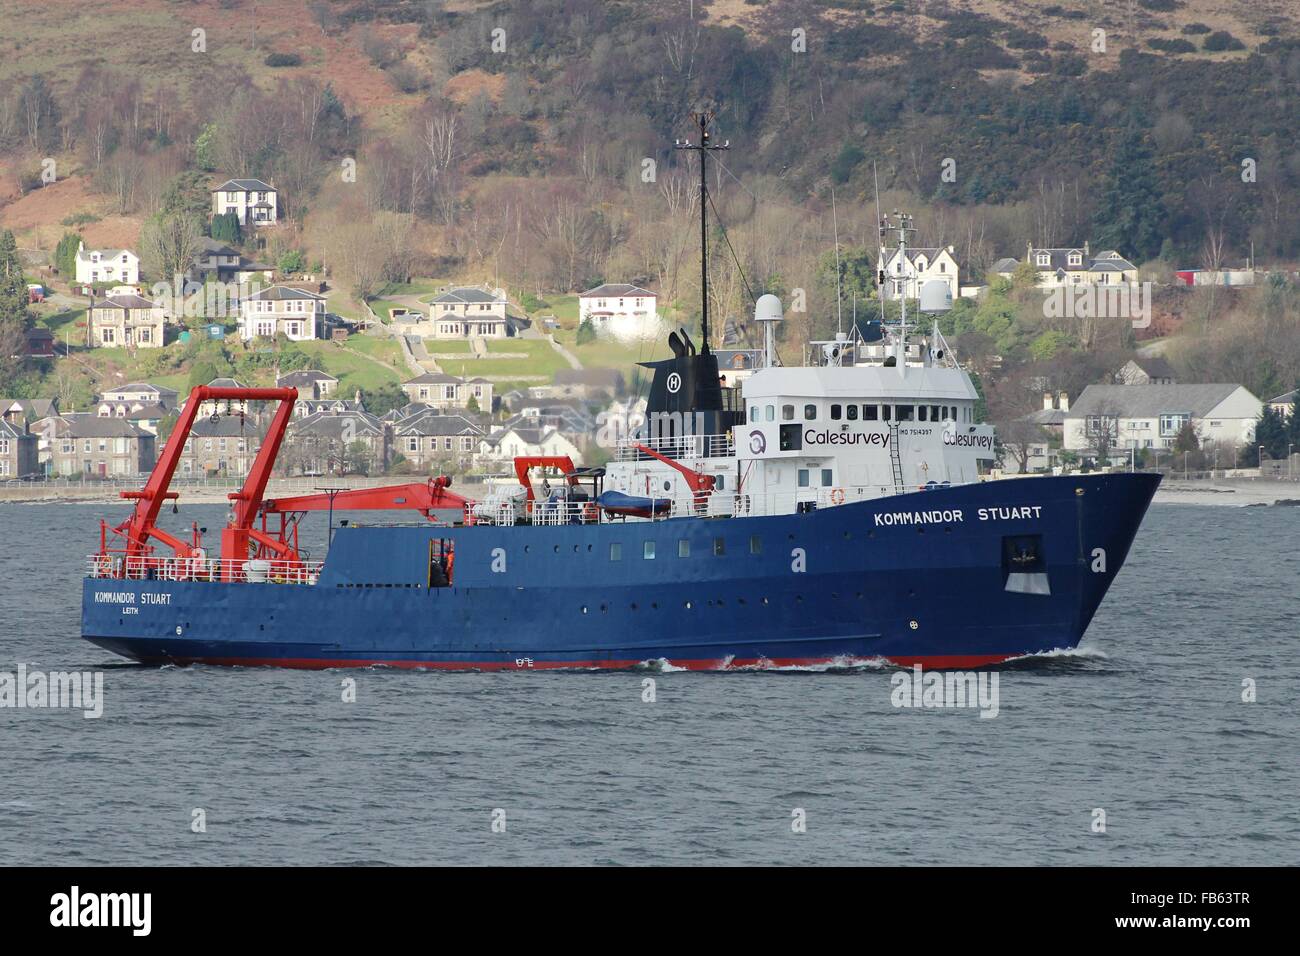 Kommandor Stuart, a geophysical survey vessel operated by Cale Survey, is seen here during a brief visit to the Firth of Clyde. Stock Photo